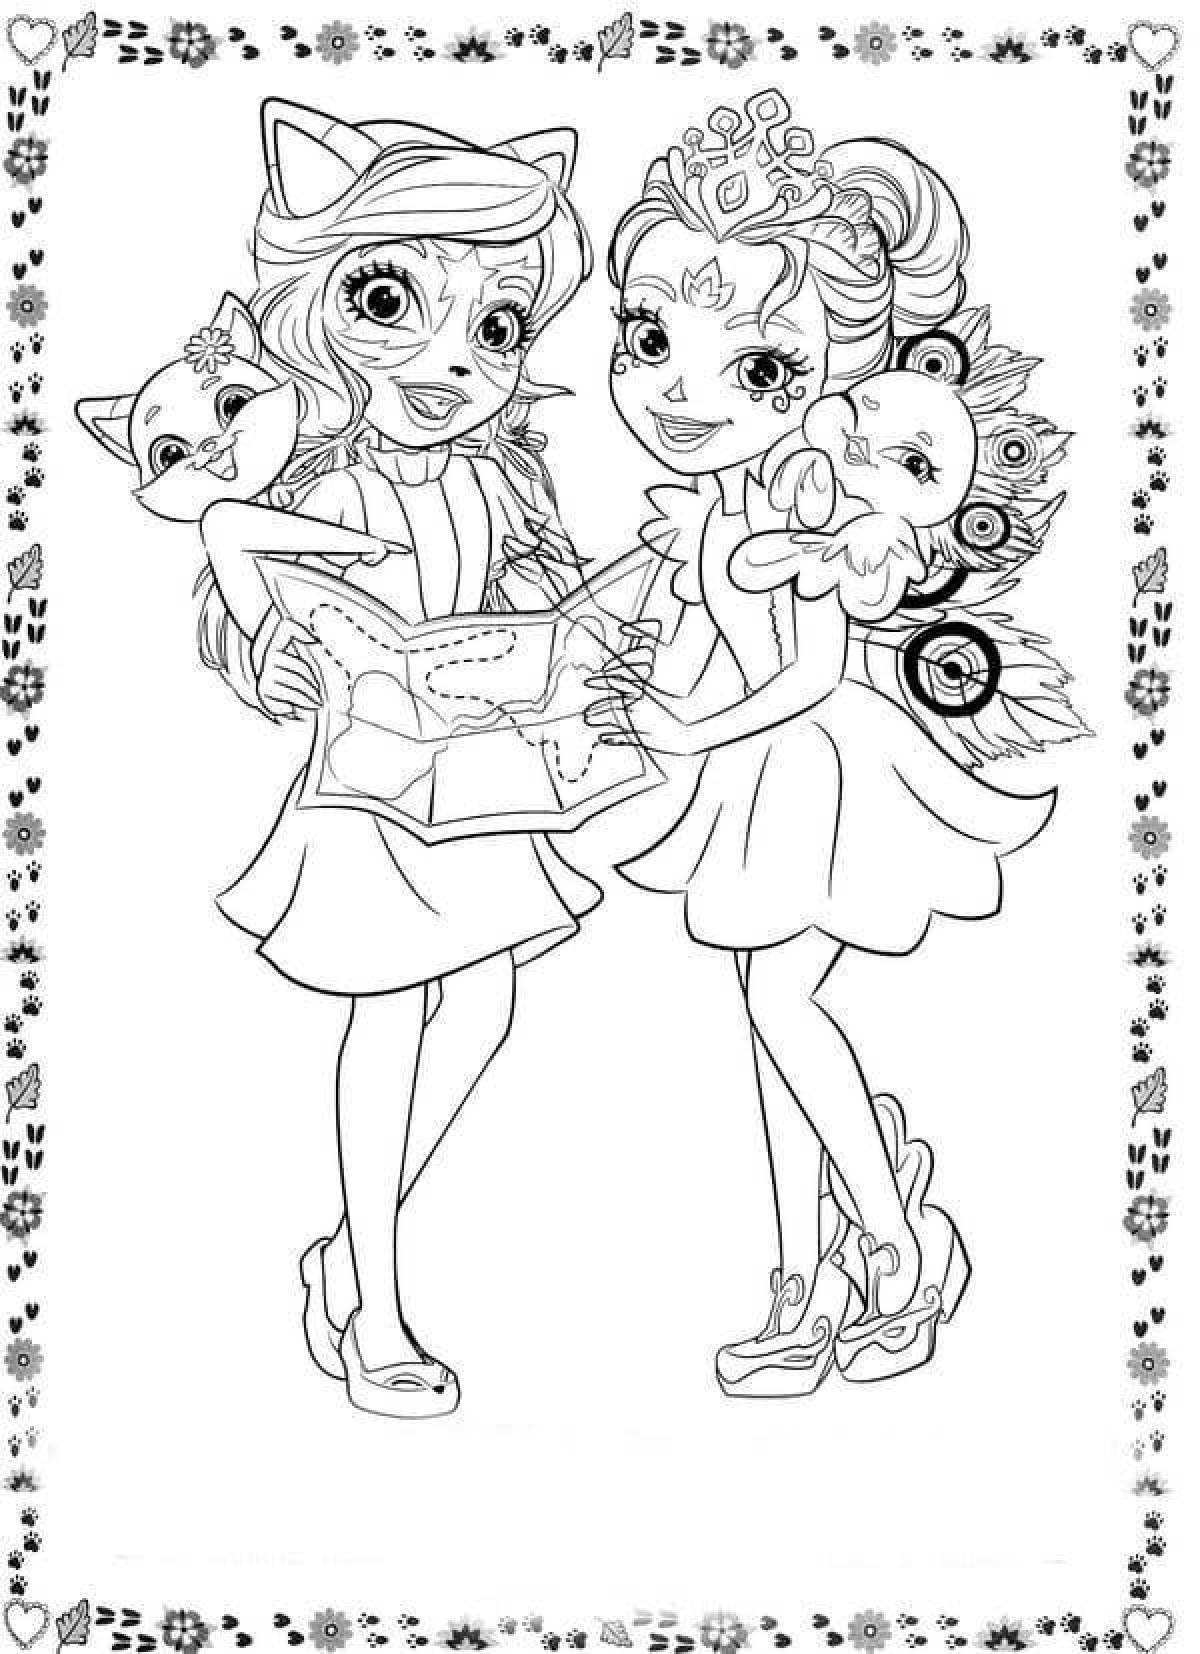 Colourful Enchantimals and Pets Coloring Pages